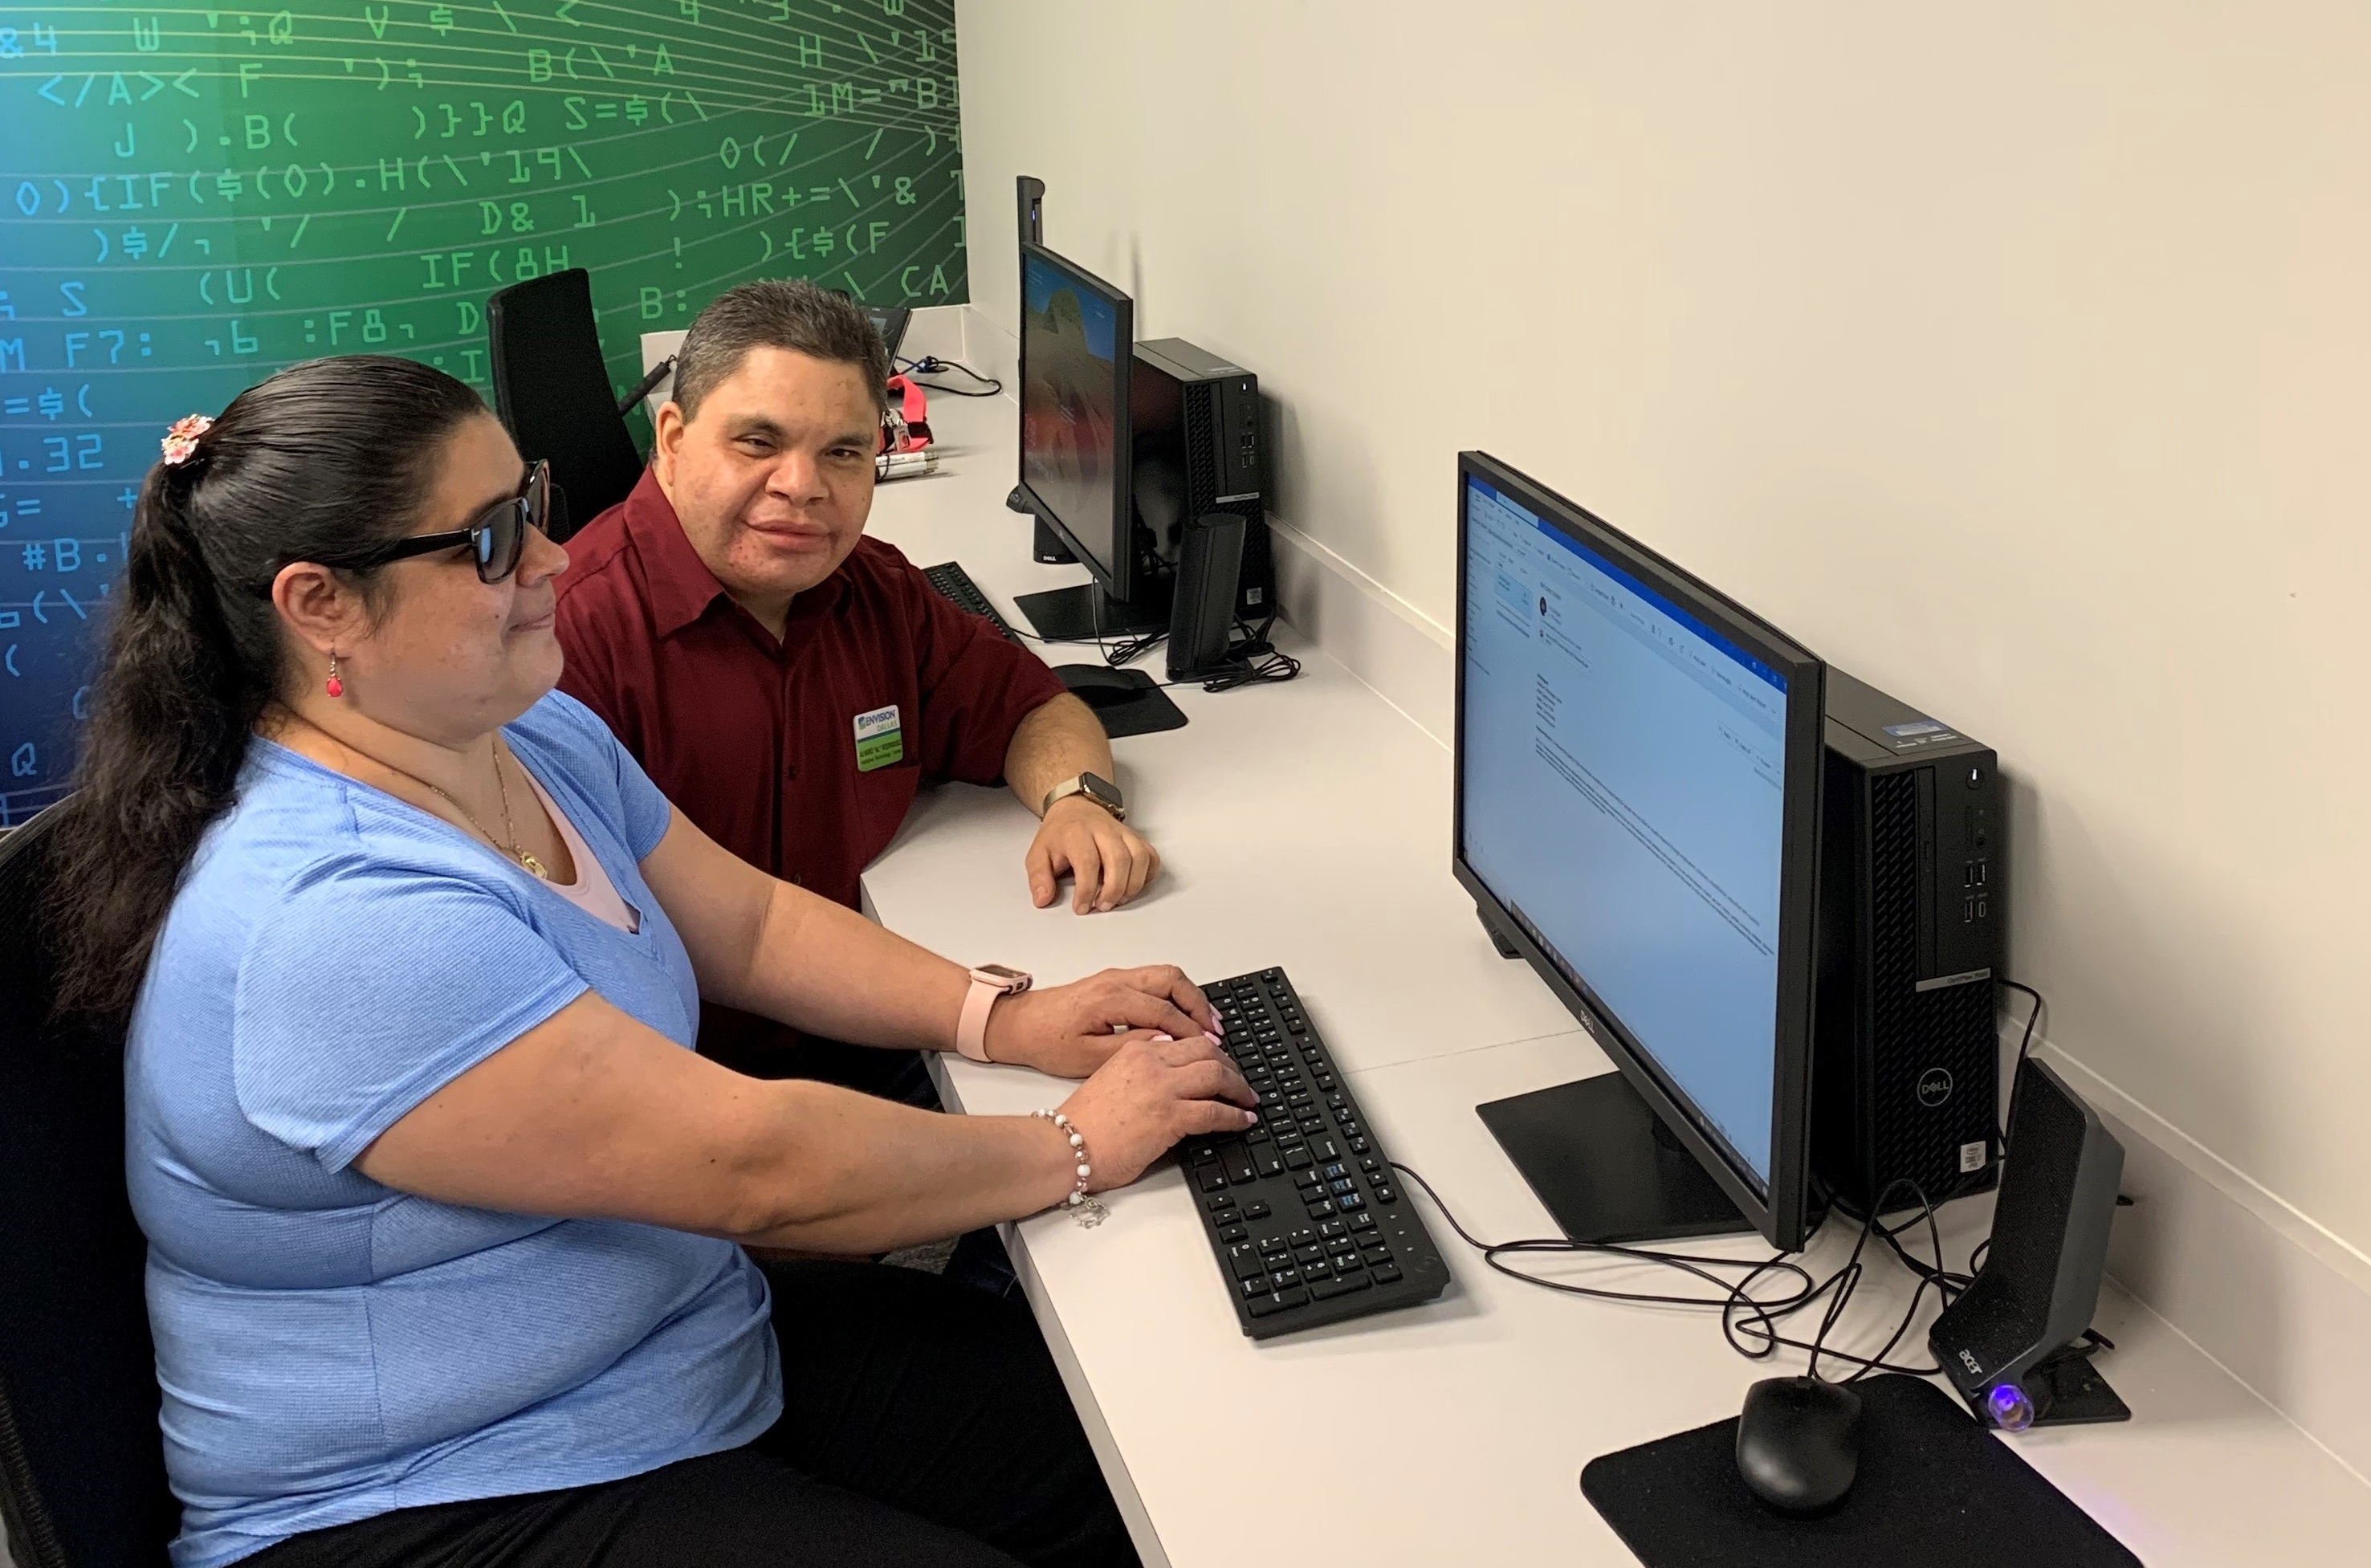 Mariela and Al in the assistive technology at envision dallas